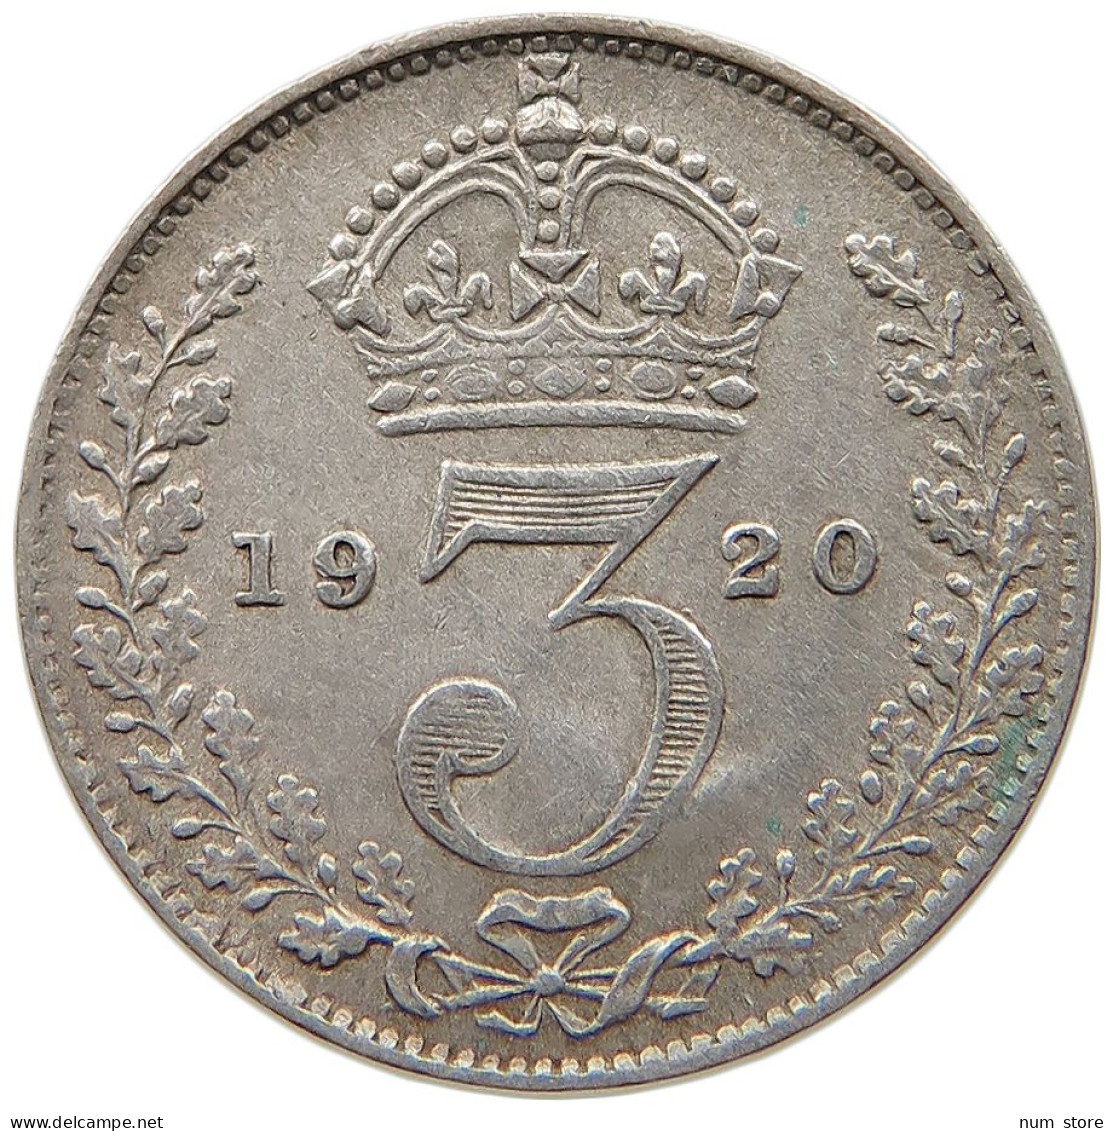 GREAT BRITAIN THREEPENCE 1920 #a033 0169 - F. 3 Pence